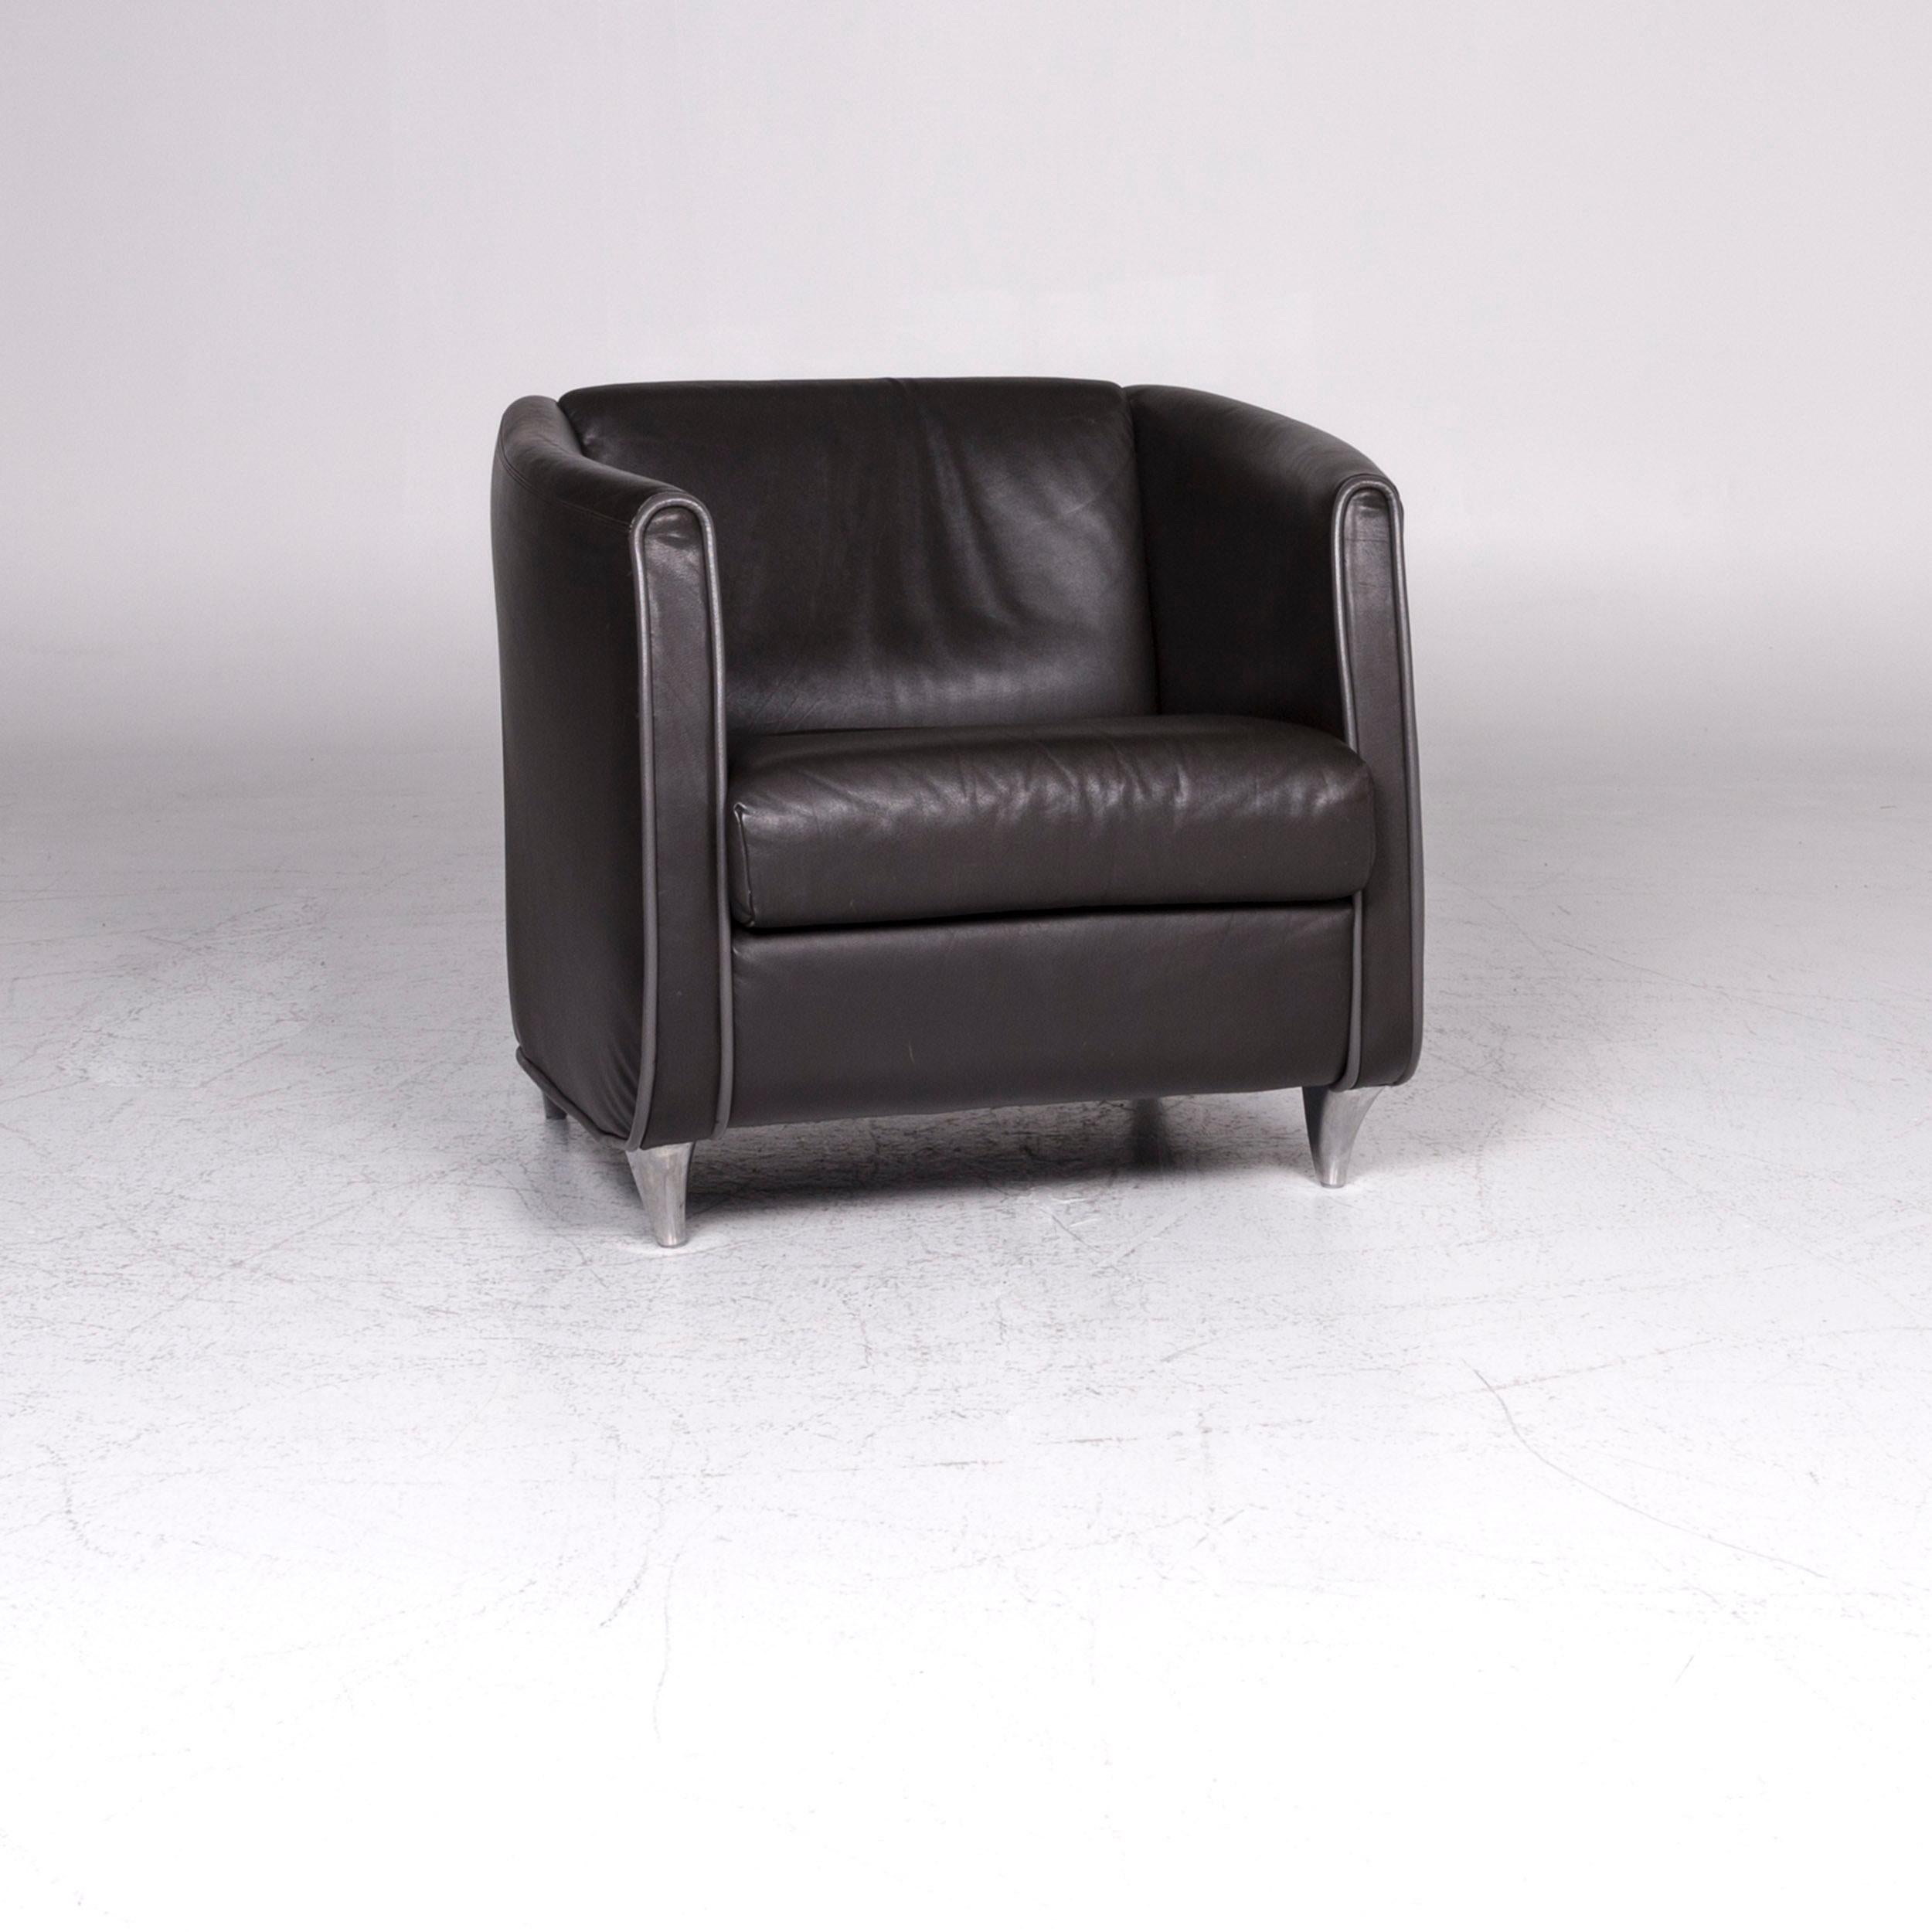 We bring to you a De Sede leather armchair black.
   
 
 Product measurements in centimeters:
 
 Depth 80
Width 84
Height 76
Seat-height 46
Rest-height 74
Seat-depth 51
Seat-width 56
Back-height 33.